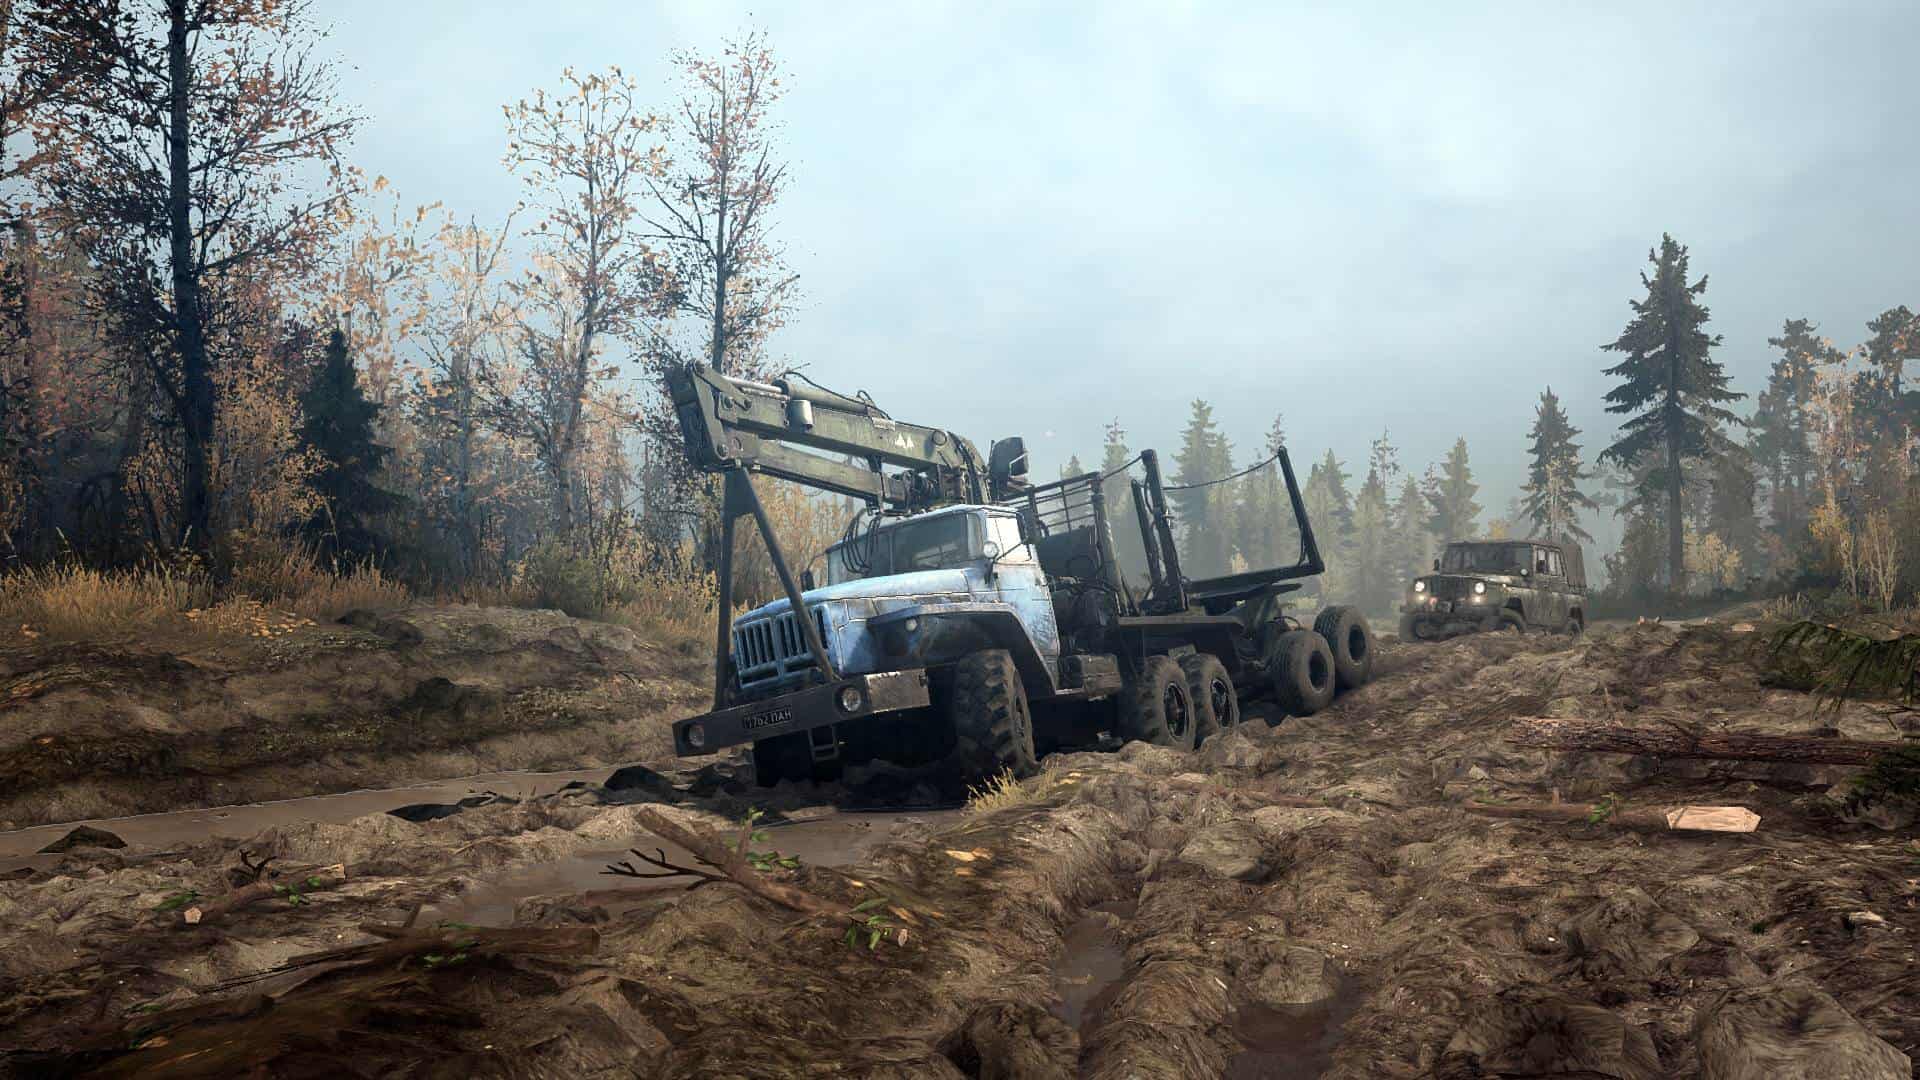 Spintires free download pc game full version